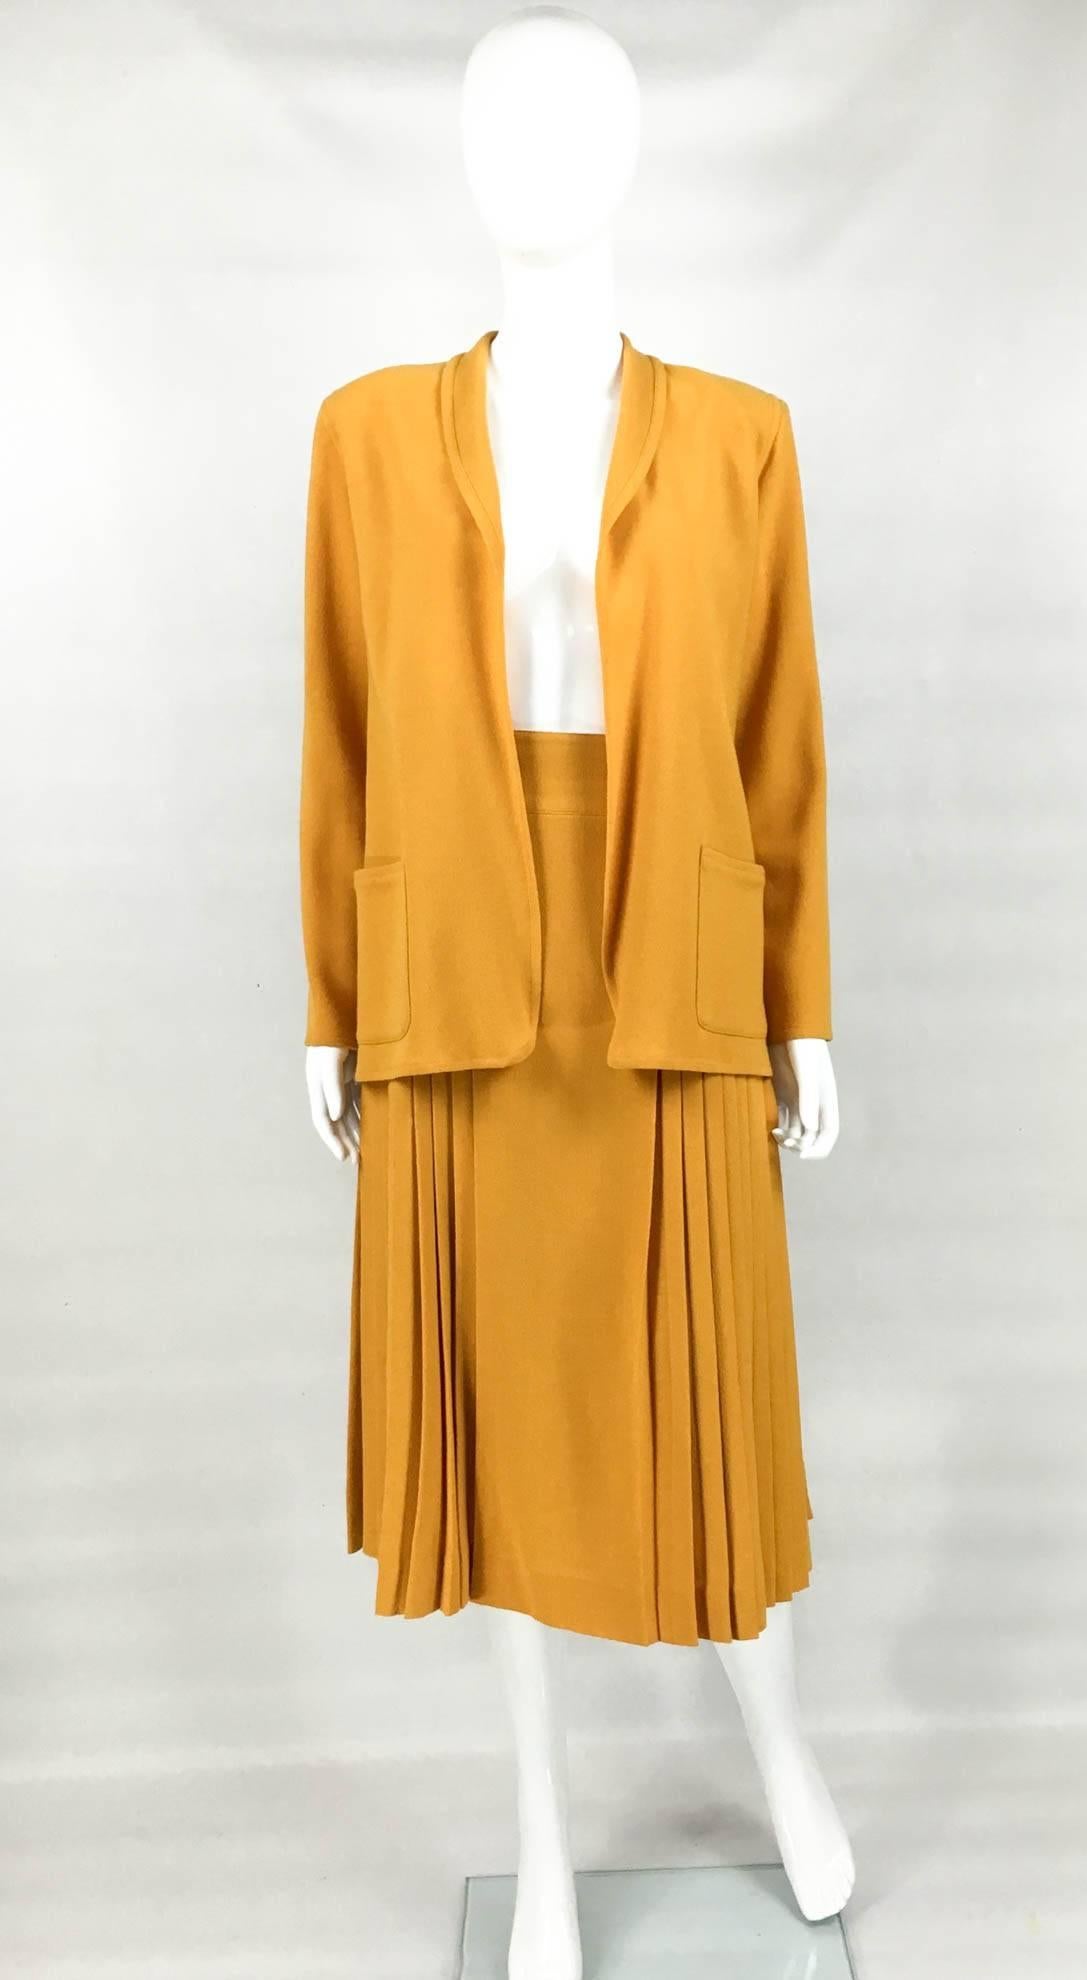 Gorgeous and Rare Vintage Christian Dior Tricots and Coordonnes Wool Crepe Mustard Suit. This fabulous mustard orange ensemble by Dior inspired by the 1940s dates back from the 1970s. With a high waist, the below the knee fully-lined pleated skirt